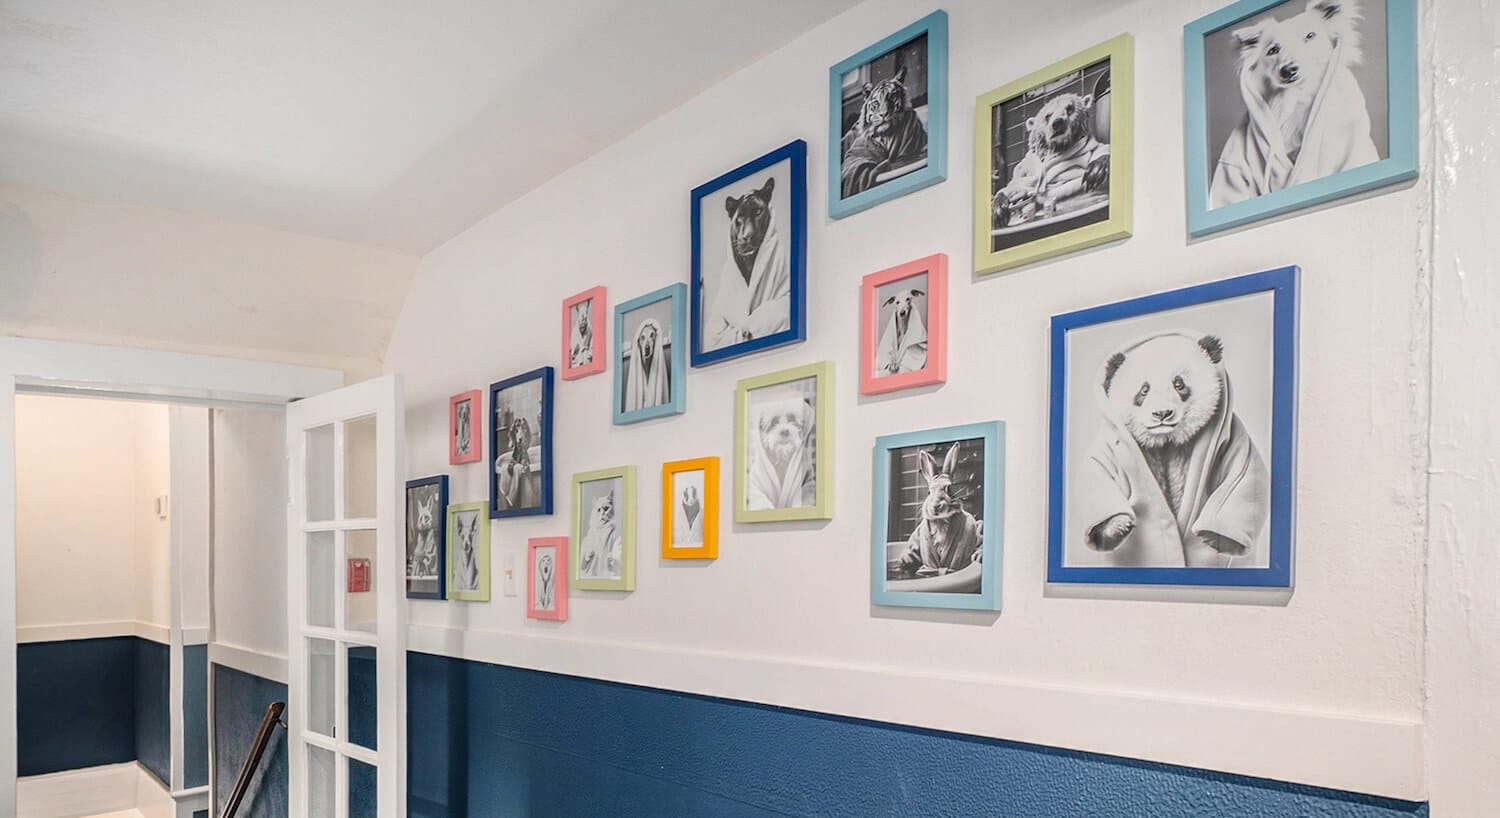 A hallway with dark blue and white walls, and several pictures of animal drawings on the wall.